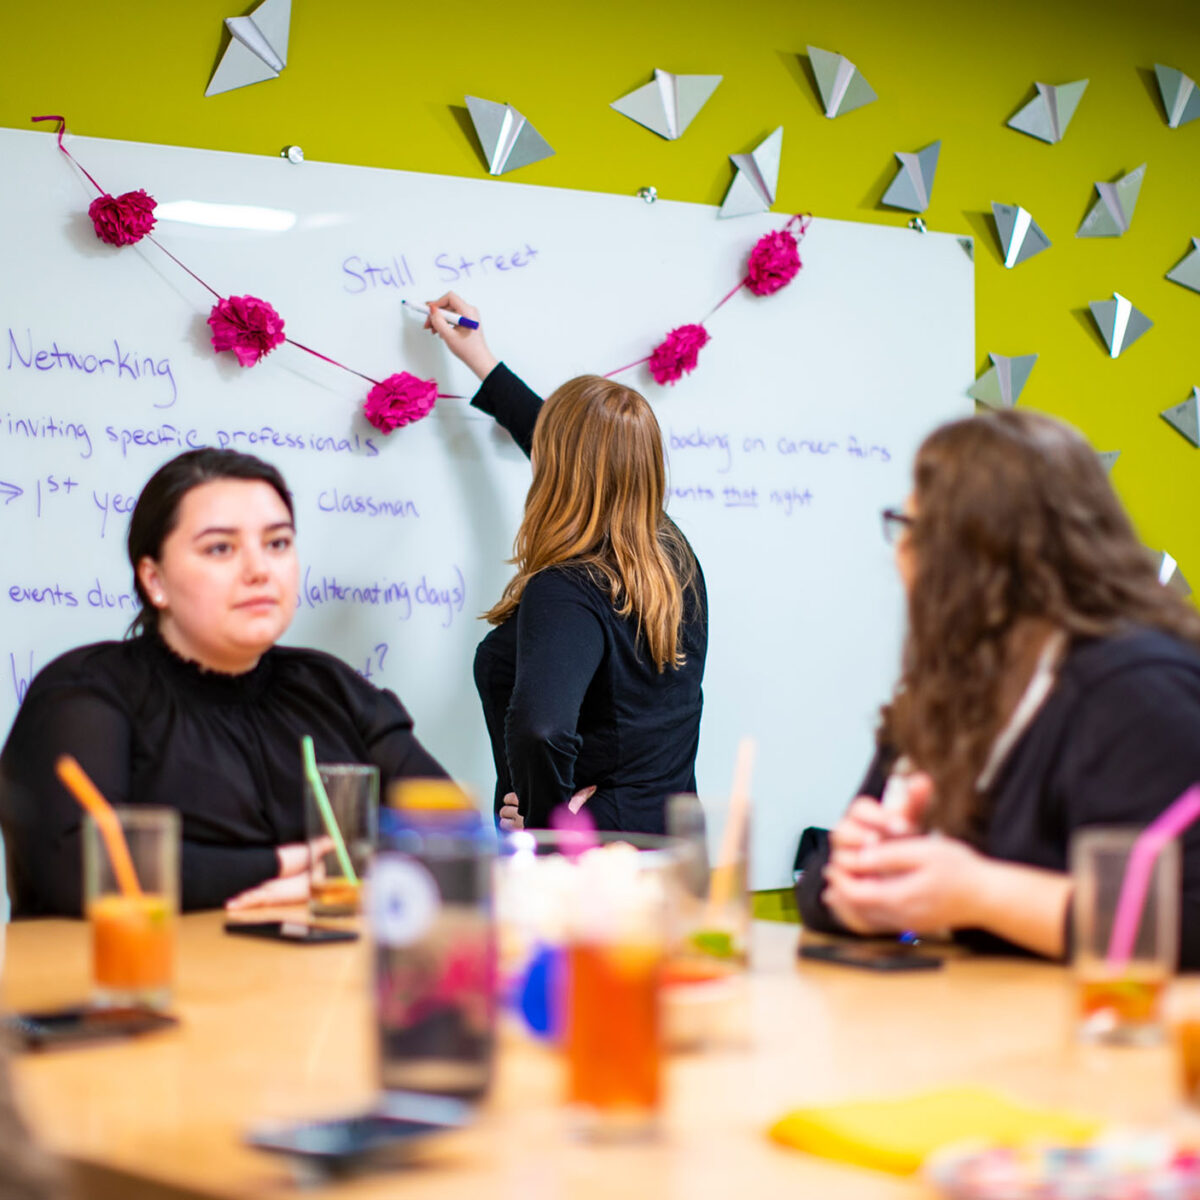 female students meet in the sarah ramsey lab, writing on a whiteboard